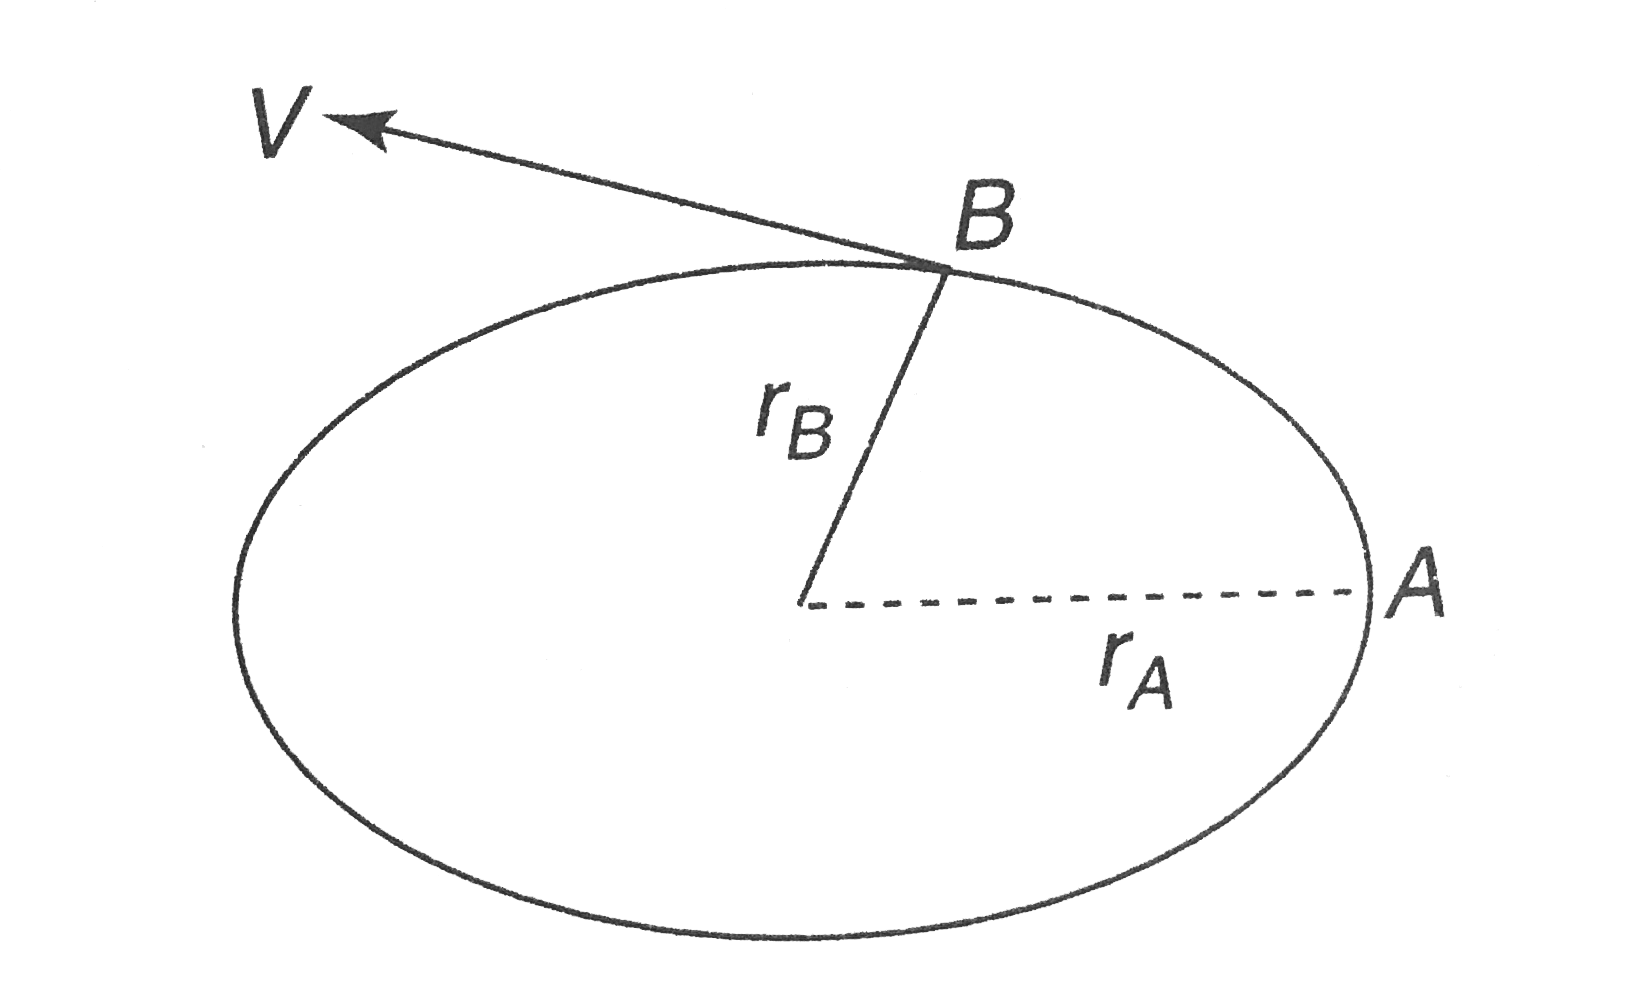 The orbital velocity of a satellite at point B with radius r(B) and n. The radius of a point A is r(A). If the orbit is increased in radial distance so that r(A) becomes .12r(A) find the orbital velocity at (1.2 r(A)):